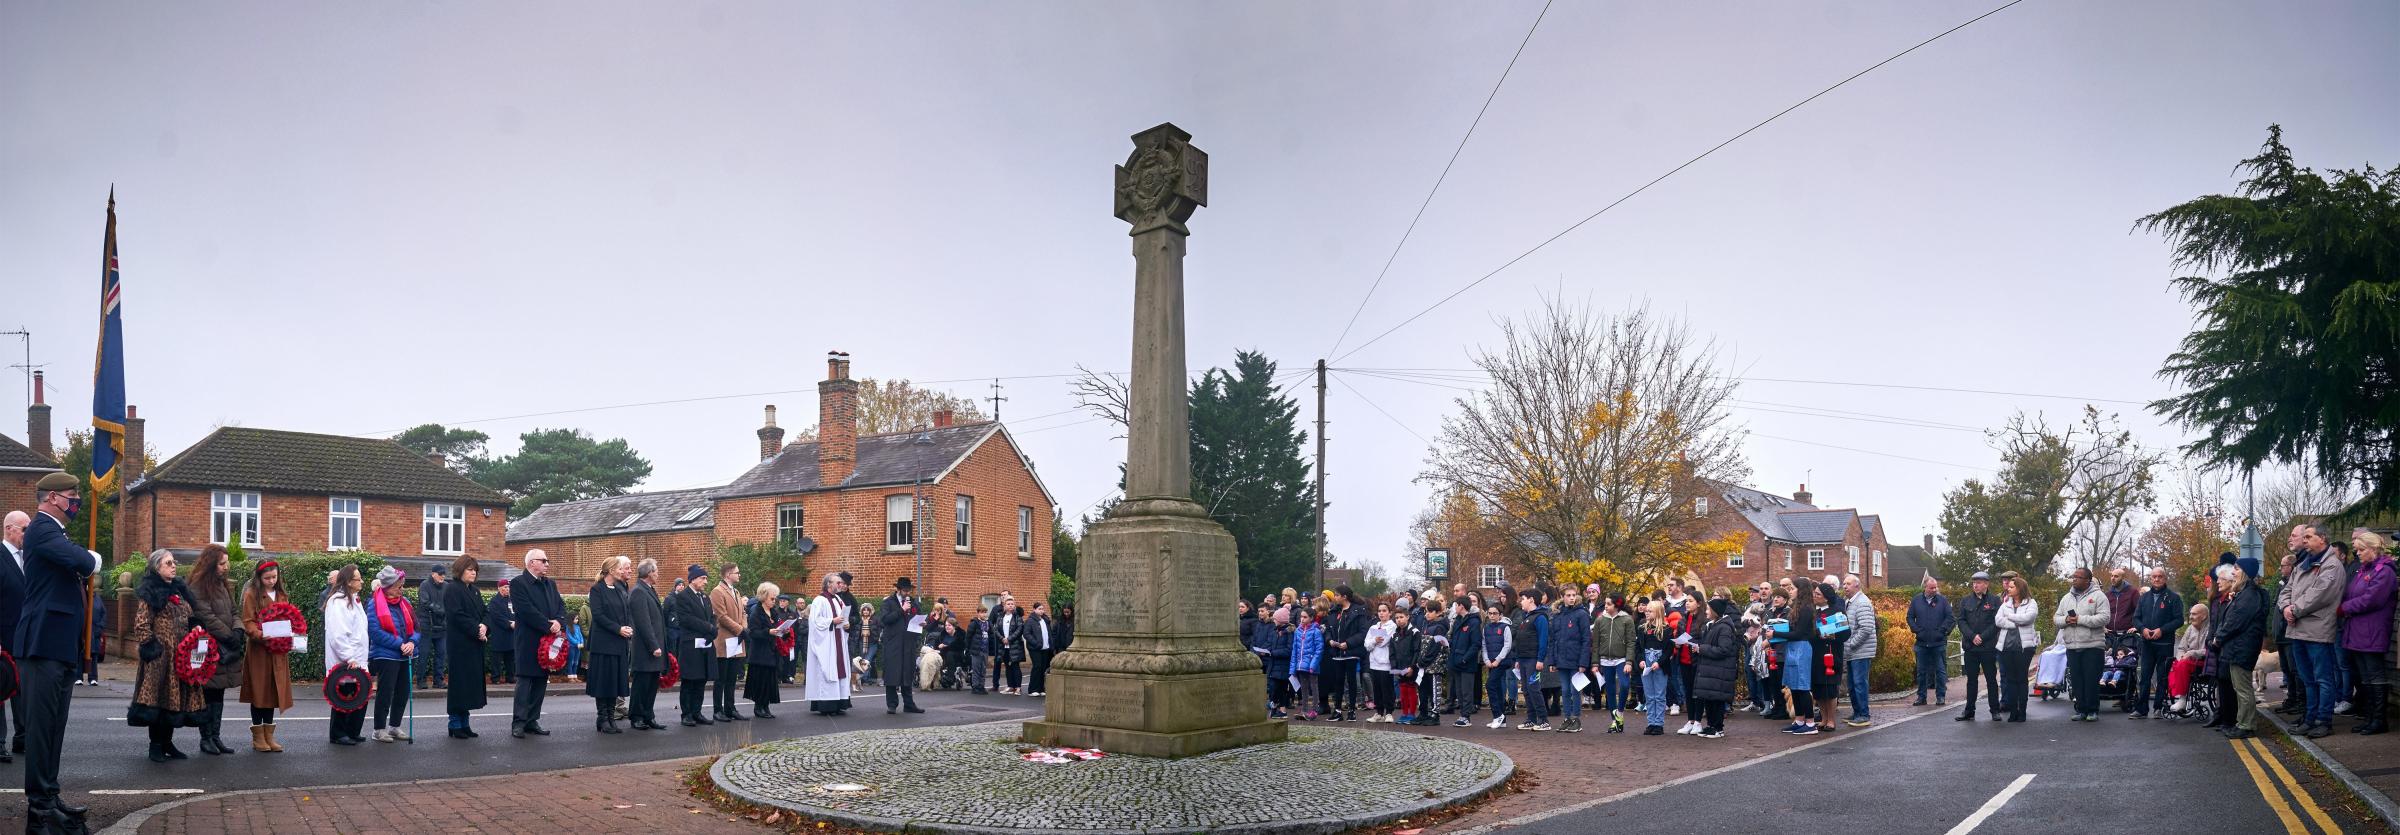 Many attended the cross communal Remembrance Sunday service (Photo: Simon Jacobs)